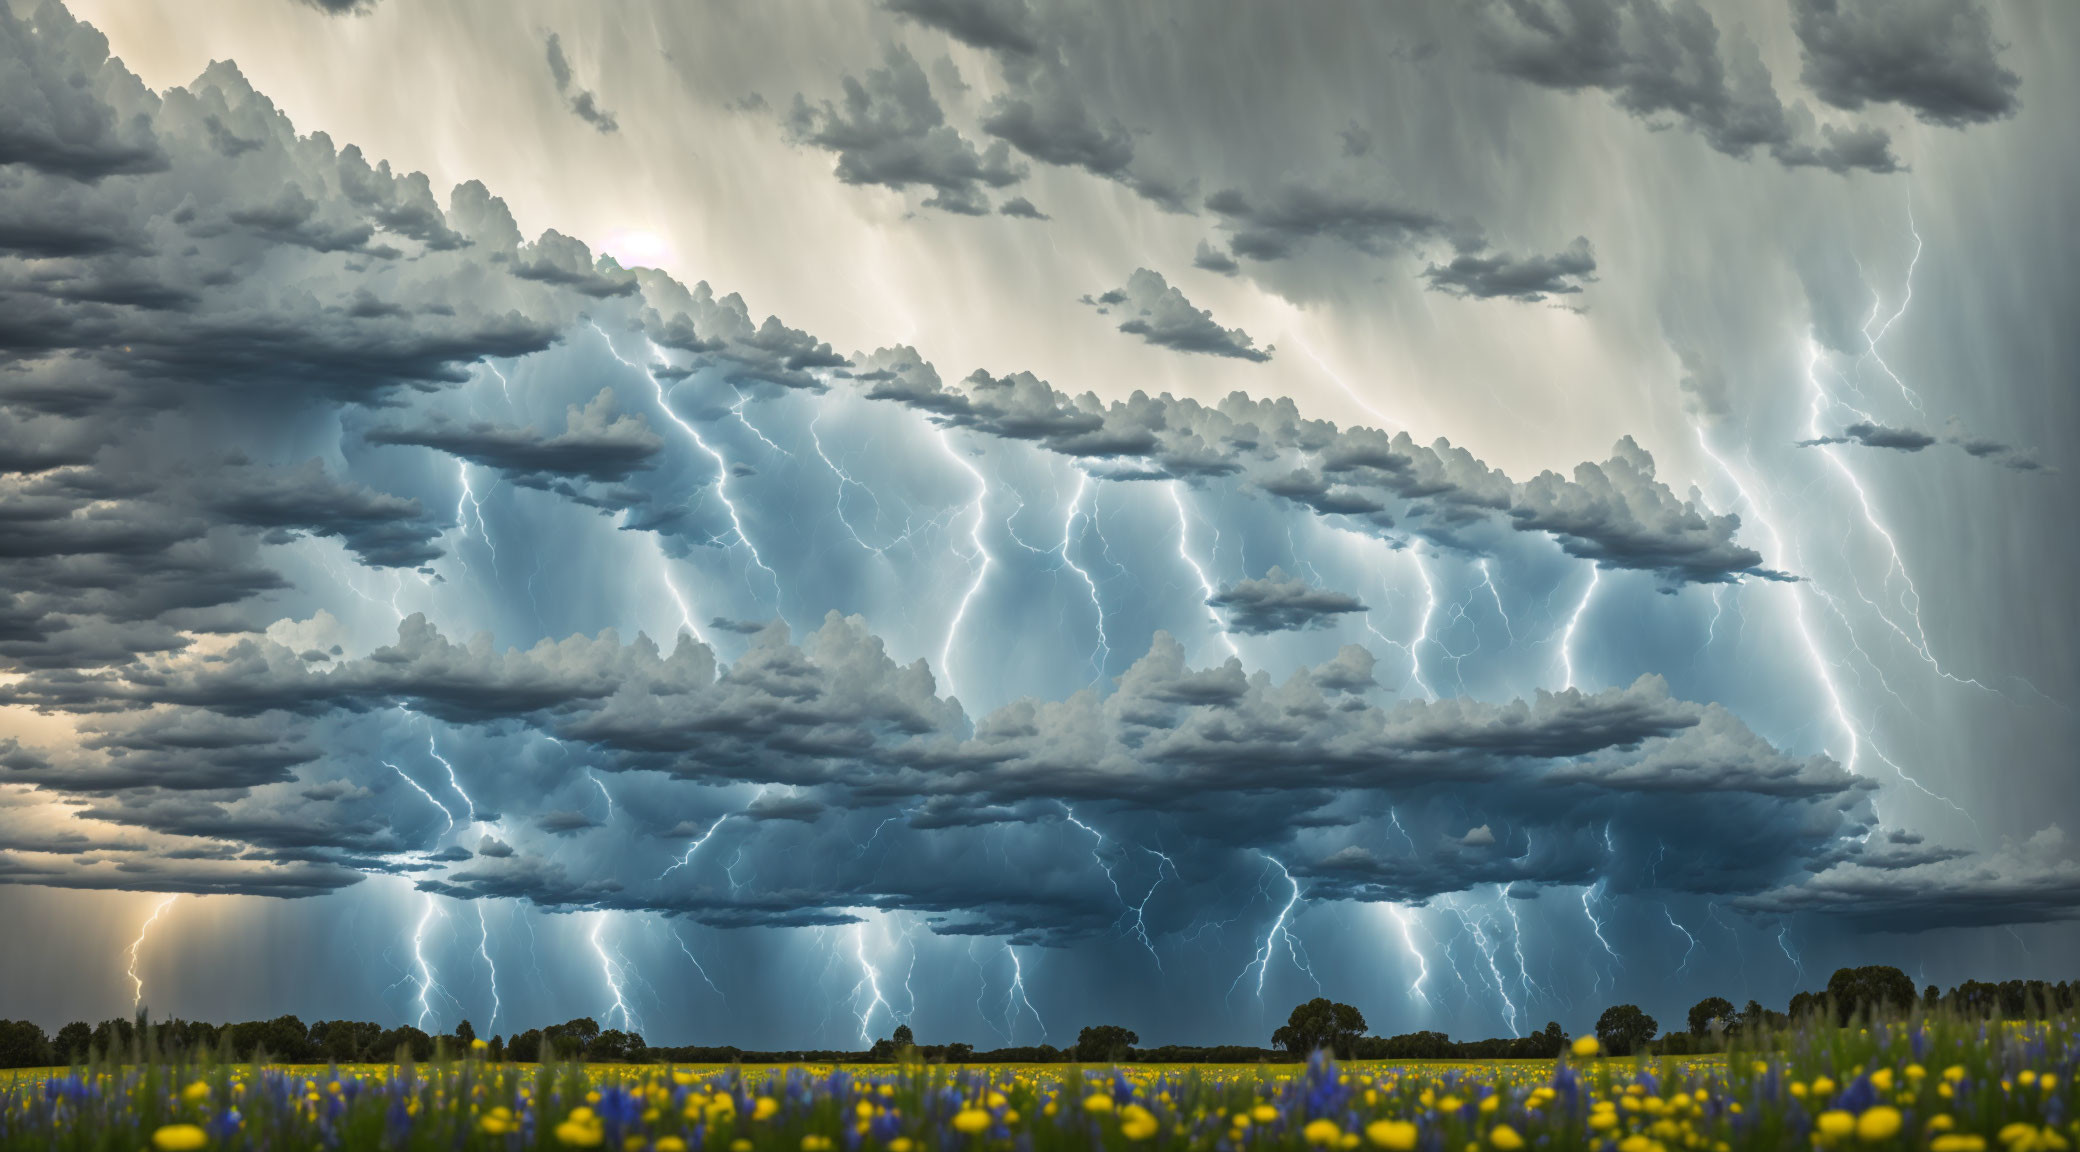 Dramatic thunderstorm with lightning strikes over wildflowers